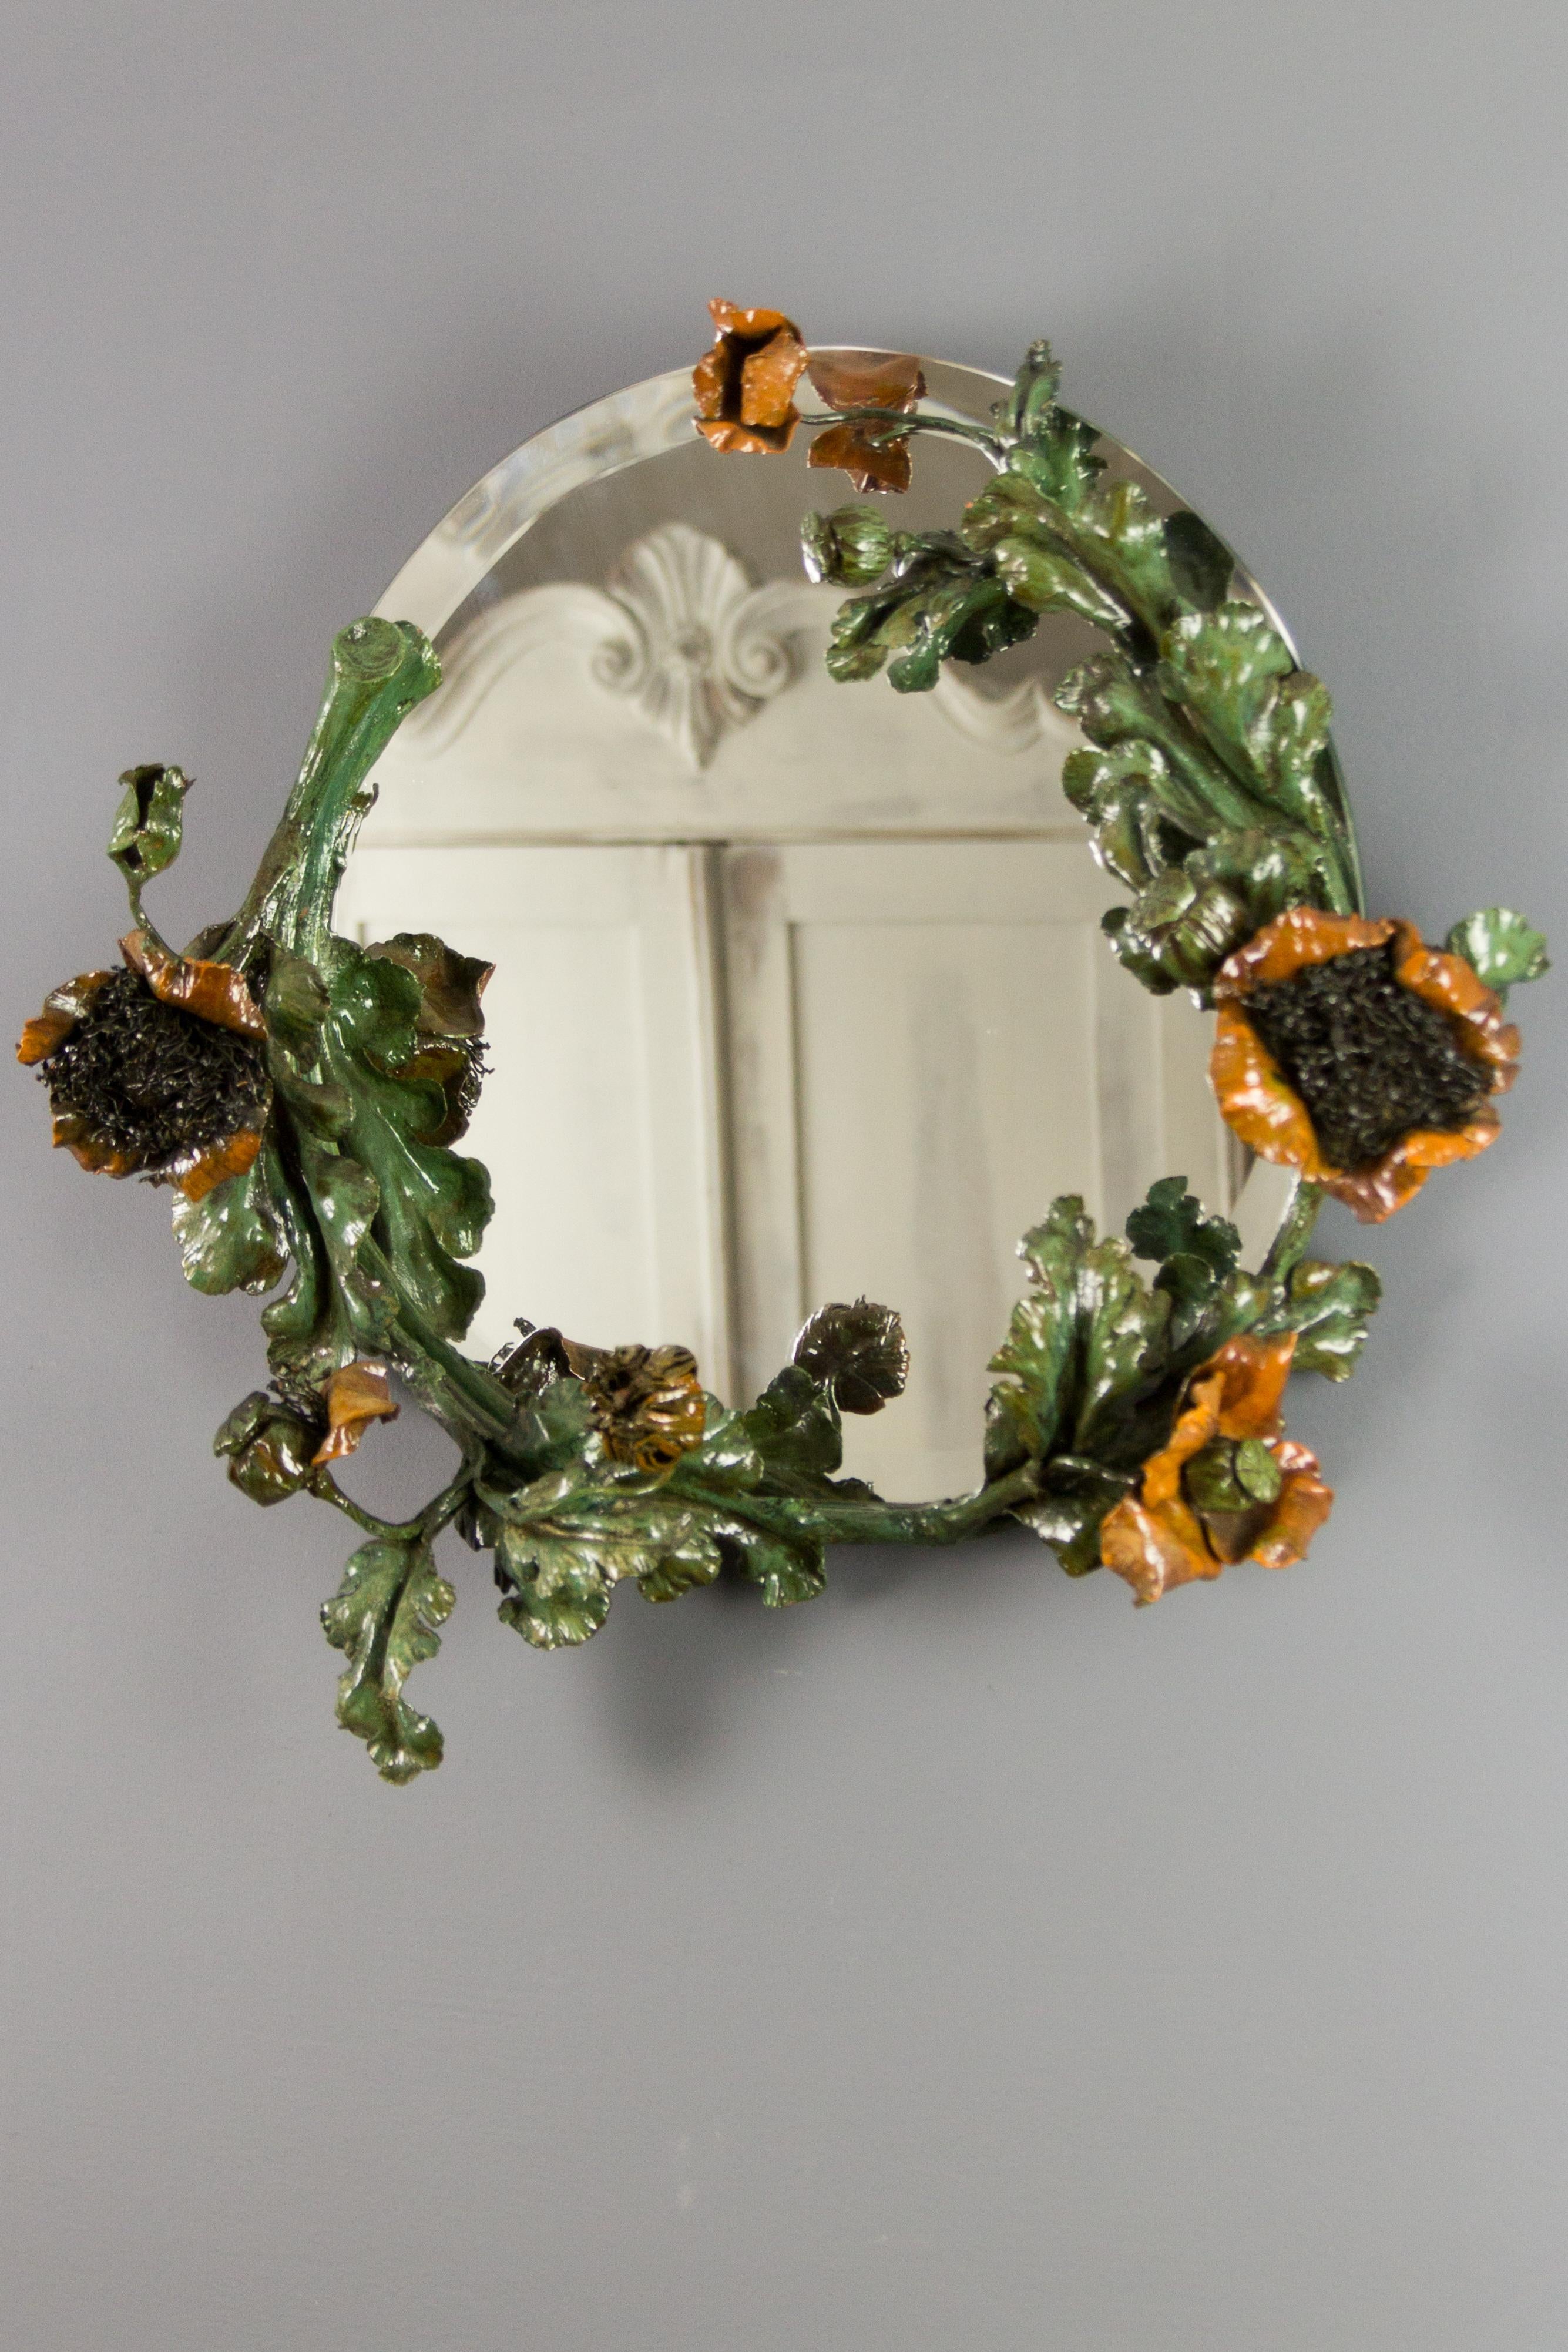 Impressive French Art Nouveau round wall mirror, frame made of wrought iron, features flowers, buds, fruits, and leaves of poppies, painted in green and dark orange color. Beautiful, natural, and realistic shapes. Round, beveled mirror,